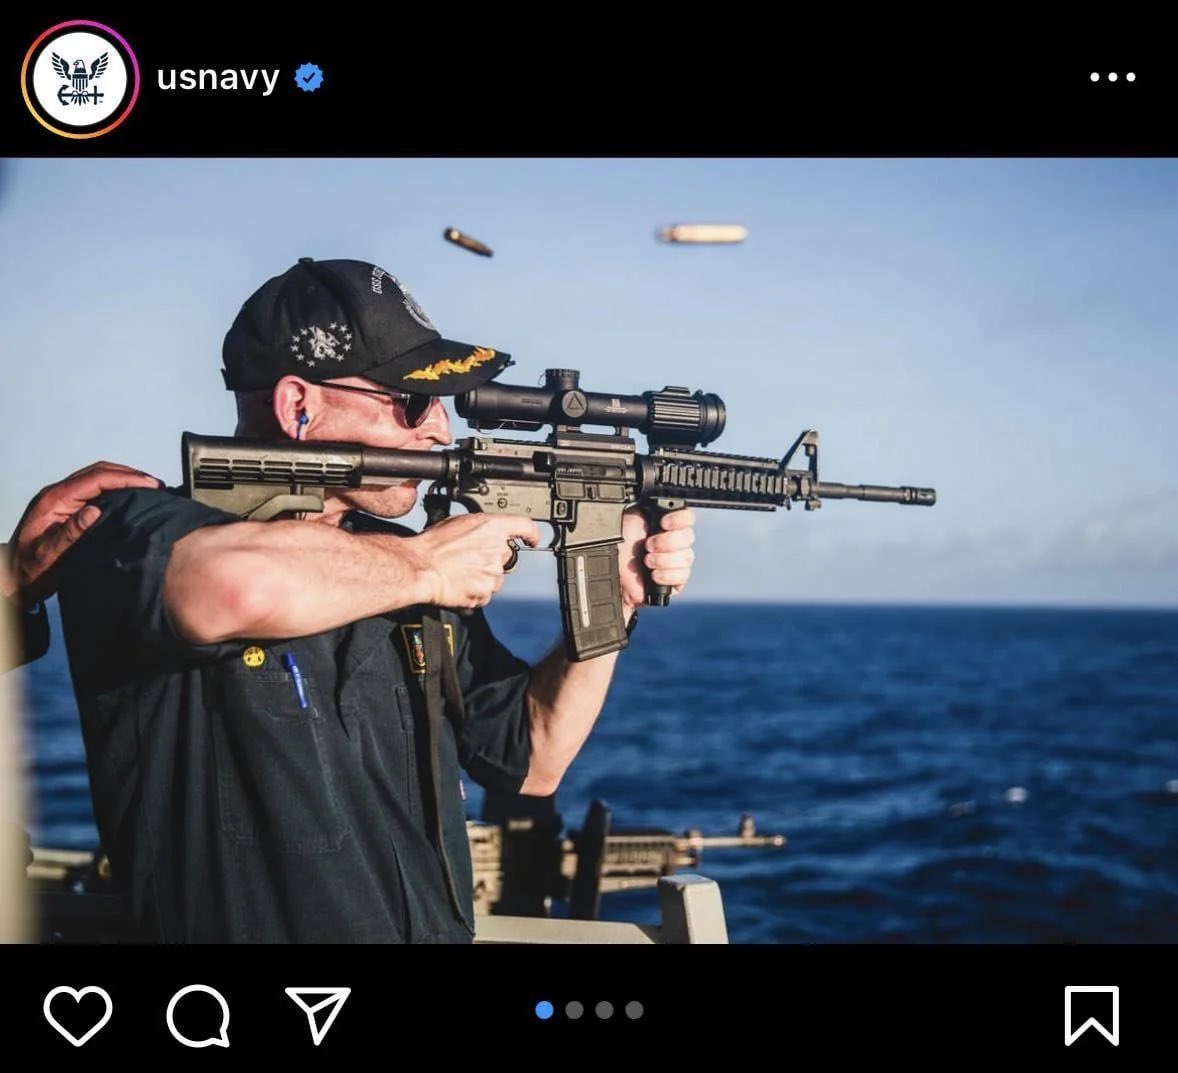 I really wish government and military contractors would stop posting photos that make our armed forces look like incapable idiots